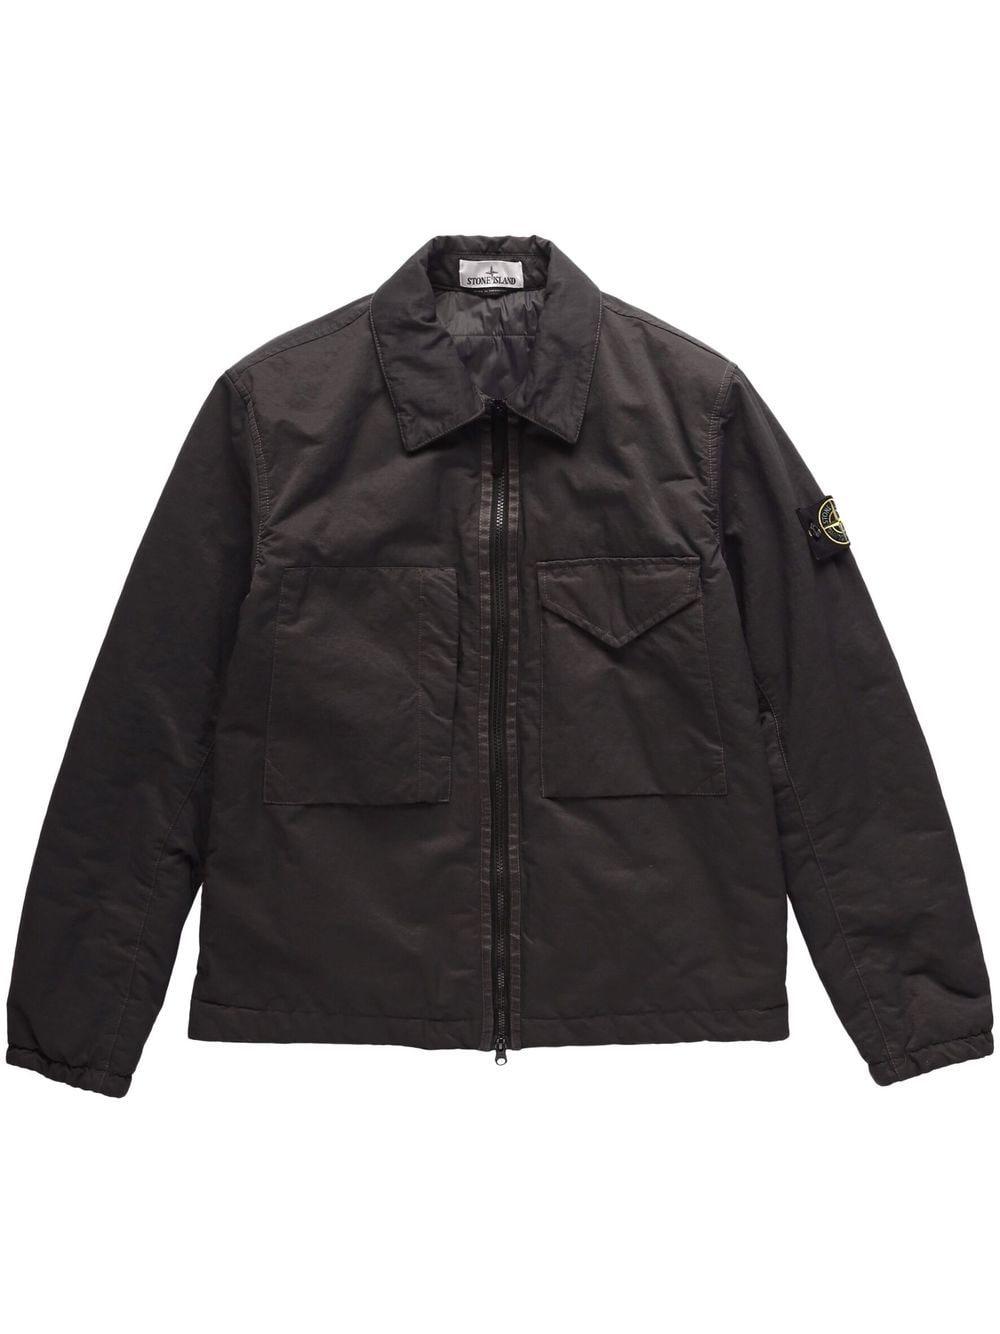 Stone Island Zipped-up Shirt Jacket in Black for Men | Lyst